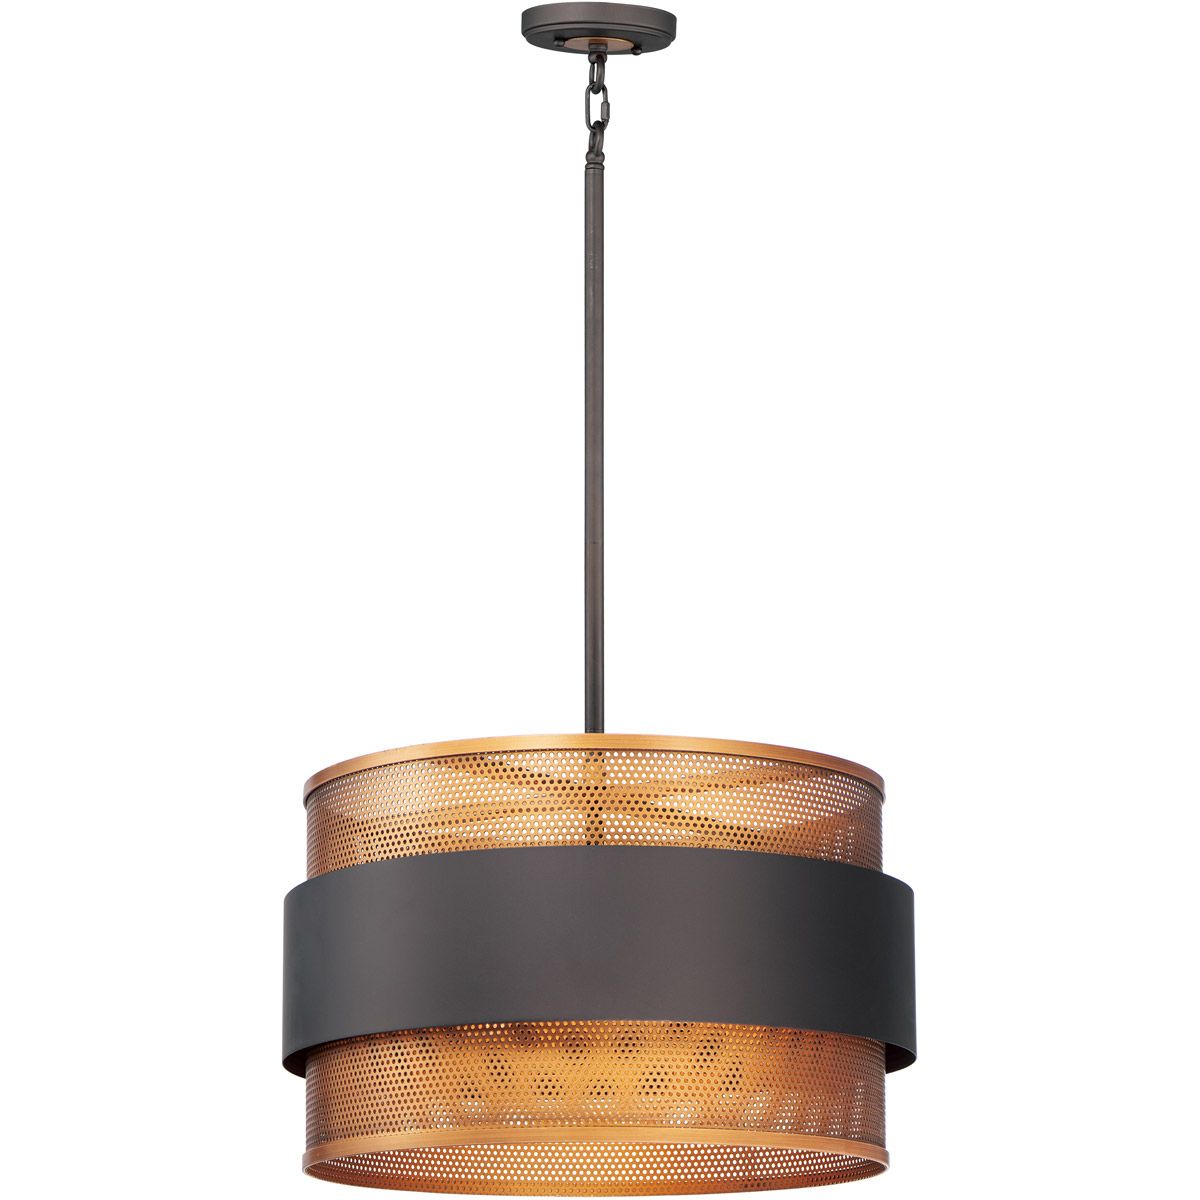 Maxim Lighting 31204Oiab Caspian Pendant Oil Rubbed Bronze Throughout Oil Rubbed Bronze And Antique Brass Four Light Chandeliers (View 4 of 15)